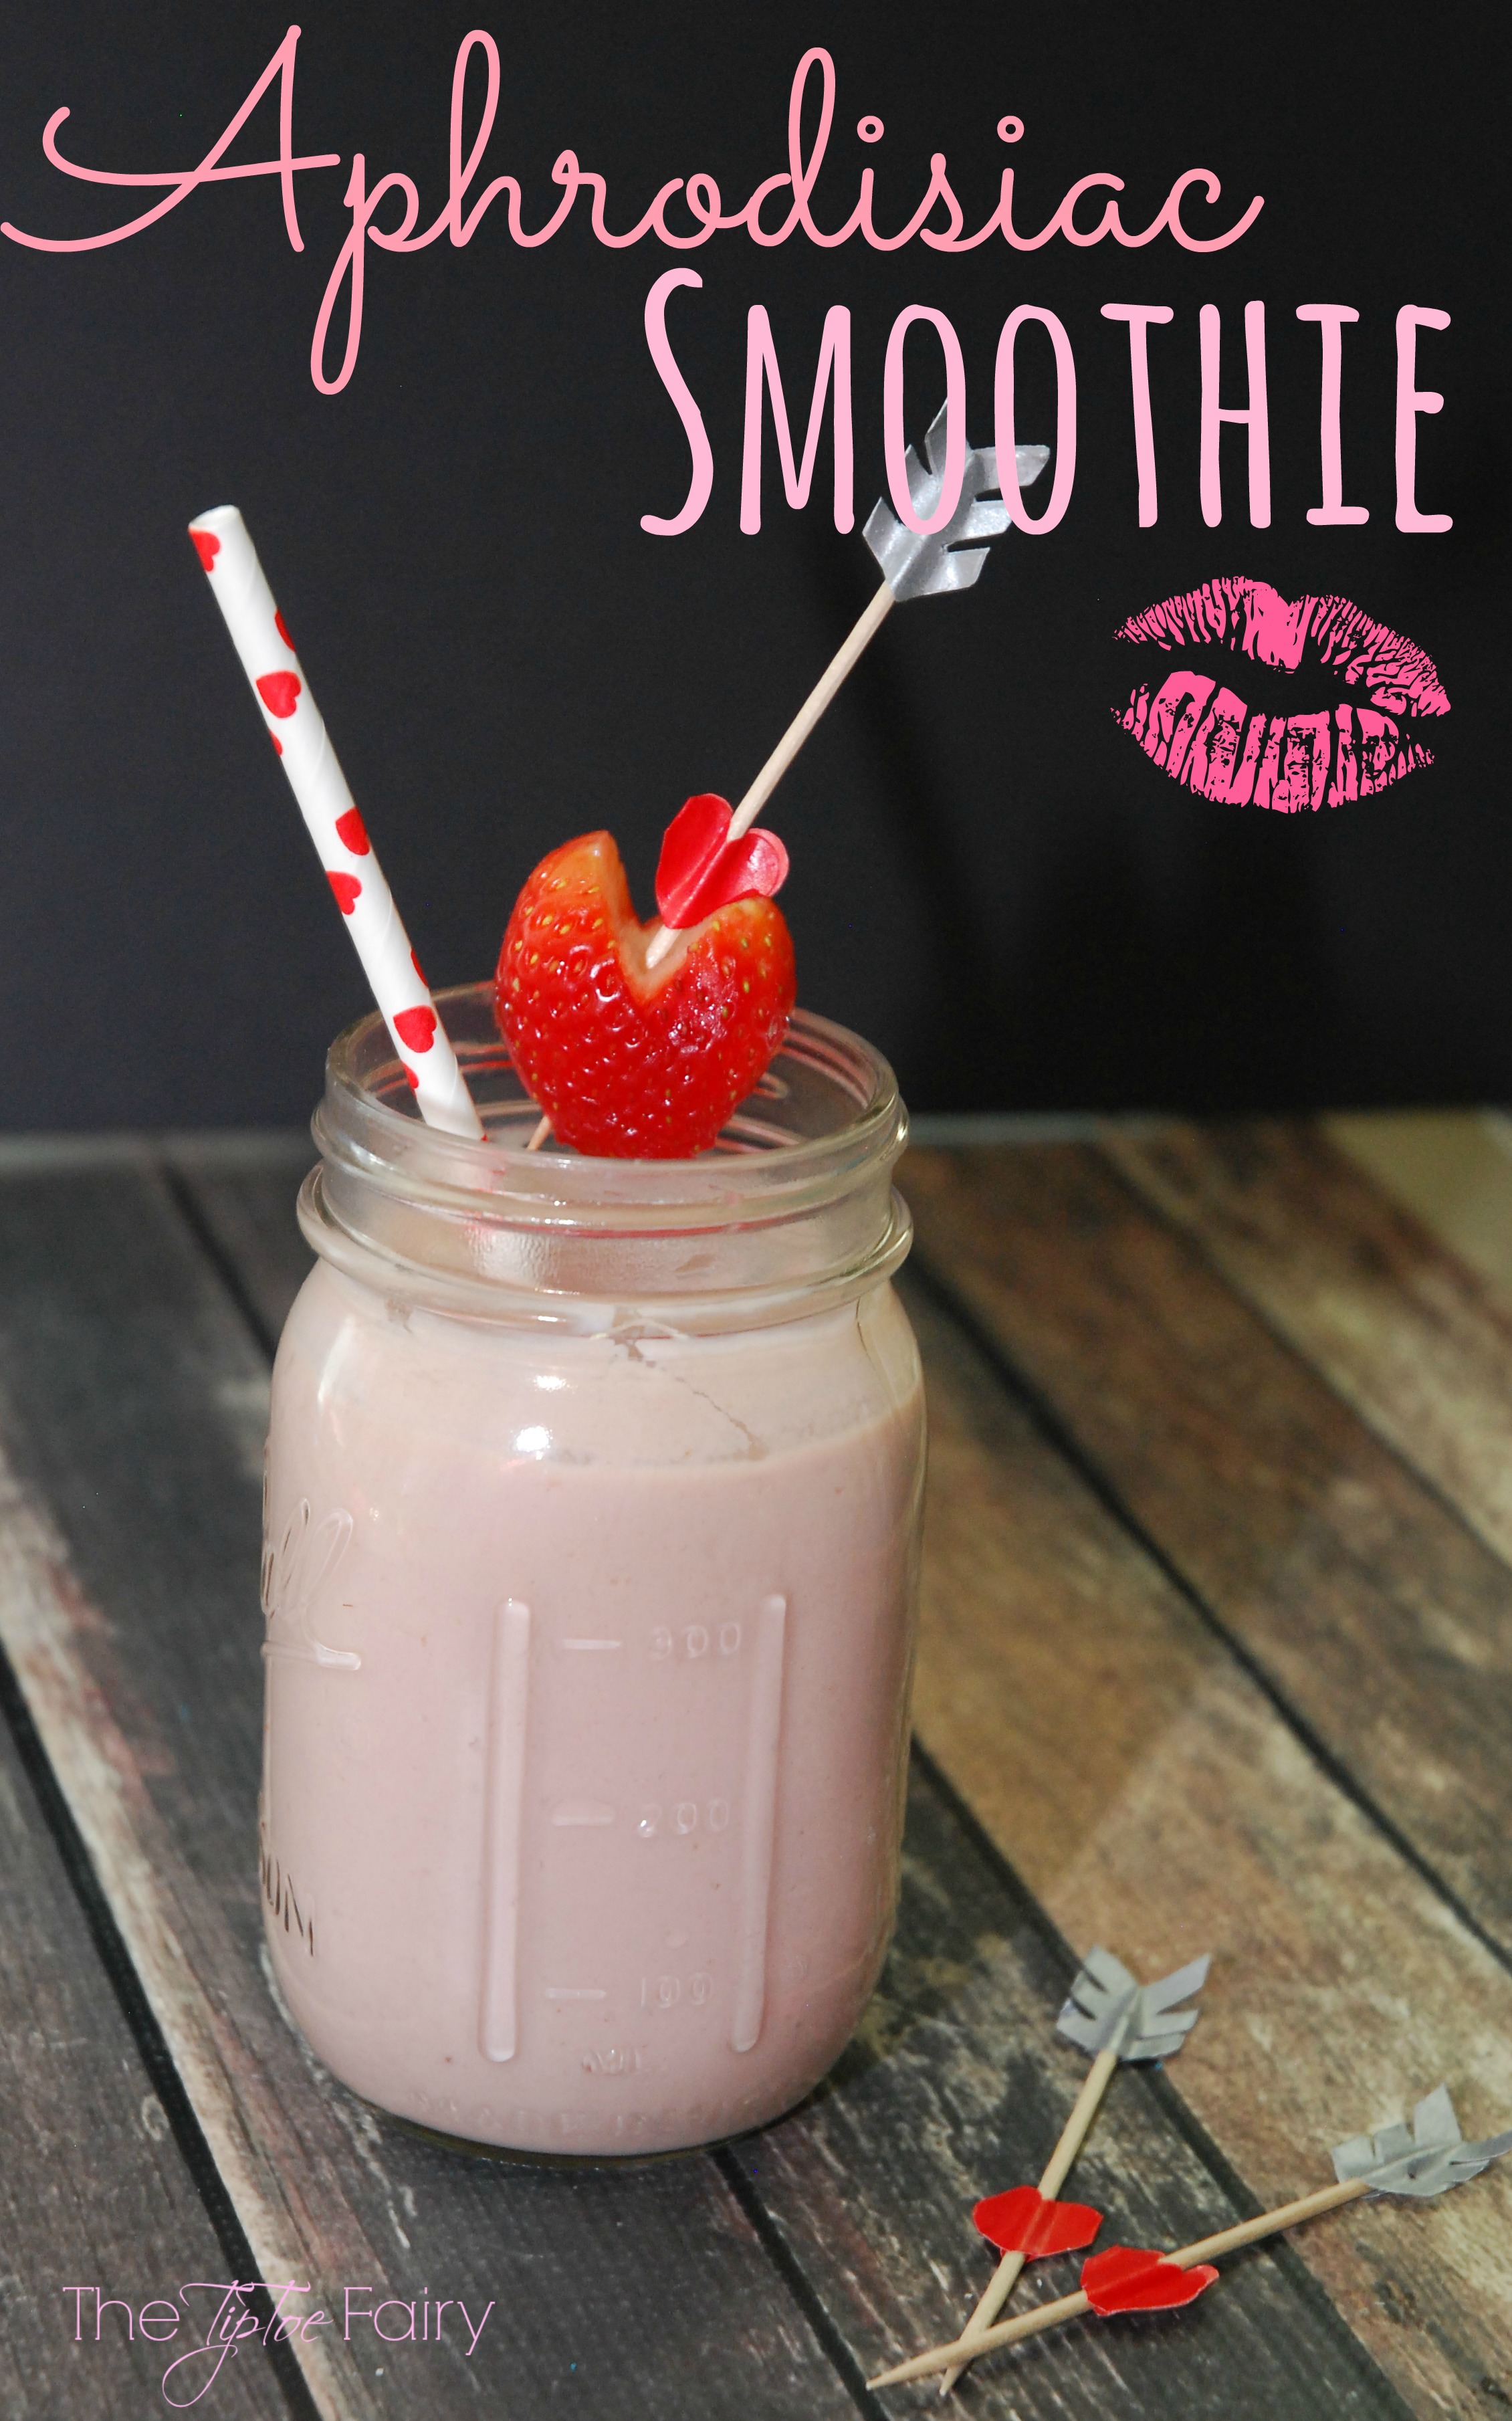 Make an Aphrodisiac #Smoothie for your #Love for #ValentinesDay #food #recipe #yum